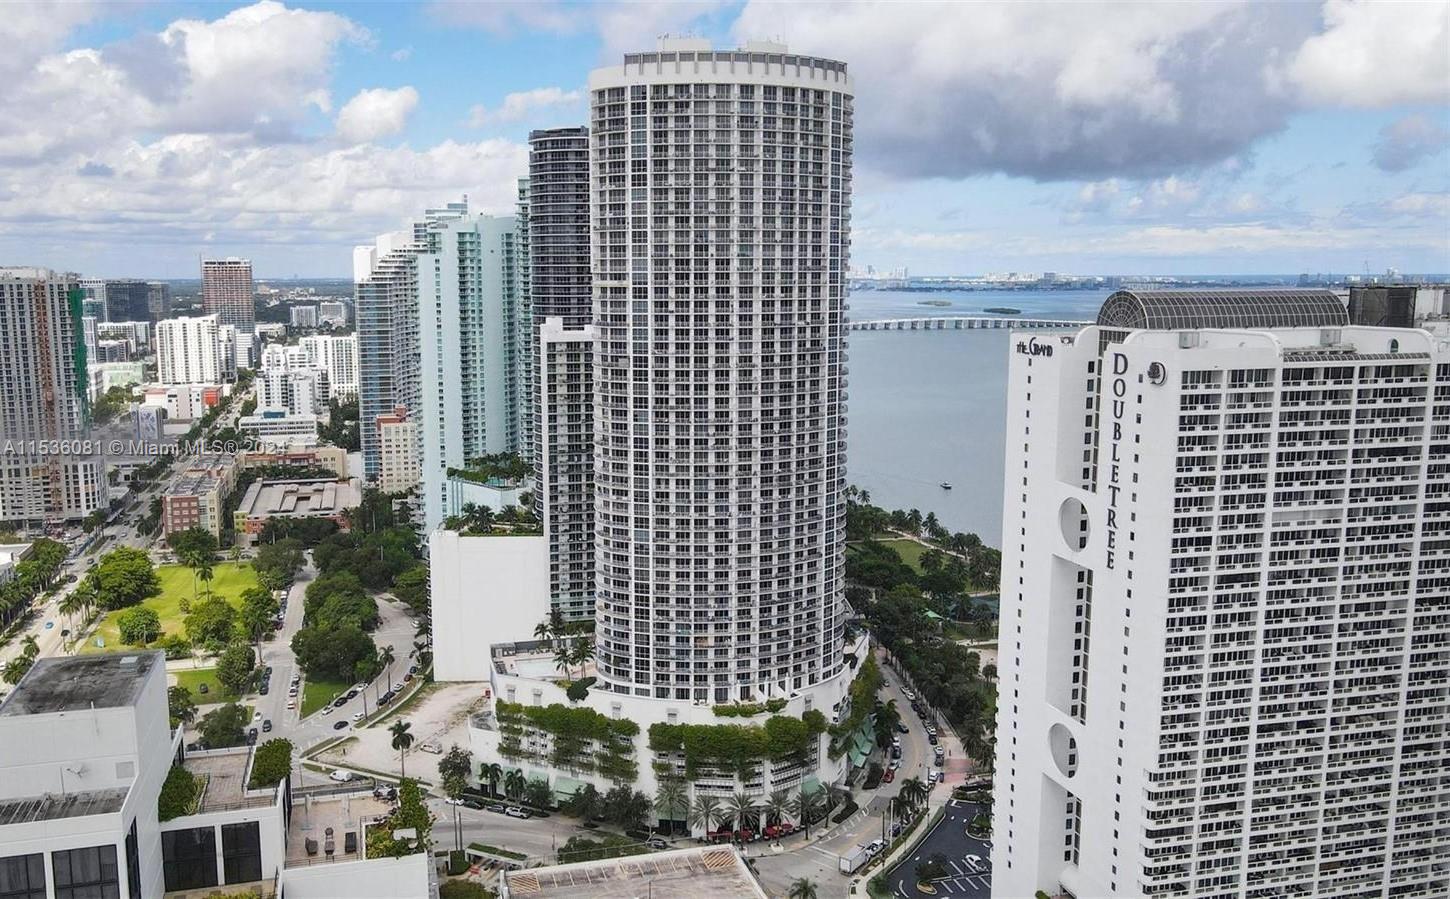 Prime Location with an stunning best 50th floor Bay & City views! Discover this exceptional studio at the Opera Tower perfect for a single person or couples. Conveniently situated only minutes from Brickell, Design District, Midtown & South Beach, near parks, restaurants, the FTX Arena, shopping centers, and more. This is fully freshly painted unit, Stainless Steel appliances and High-impact door. The building offers 24hr security/concierge & Valet. HOA includes high-speed internet & basic cable, pool, health club, whirlpool, spa, sauna, BBQ area and more. Right across the Margaret Pace Park with volleyball, basketball, tennis courts, jogging path & soccer field. Easy access to I-95 only 30mins to Miami Airport & 45mins to Ft. Lauderdale Airport. Mini market & hair salon in the building.